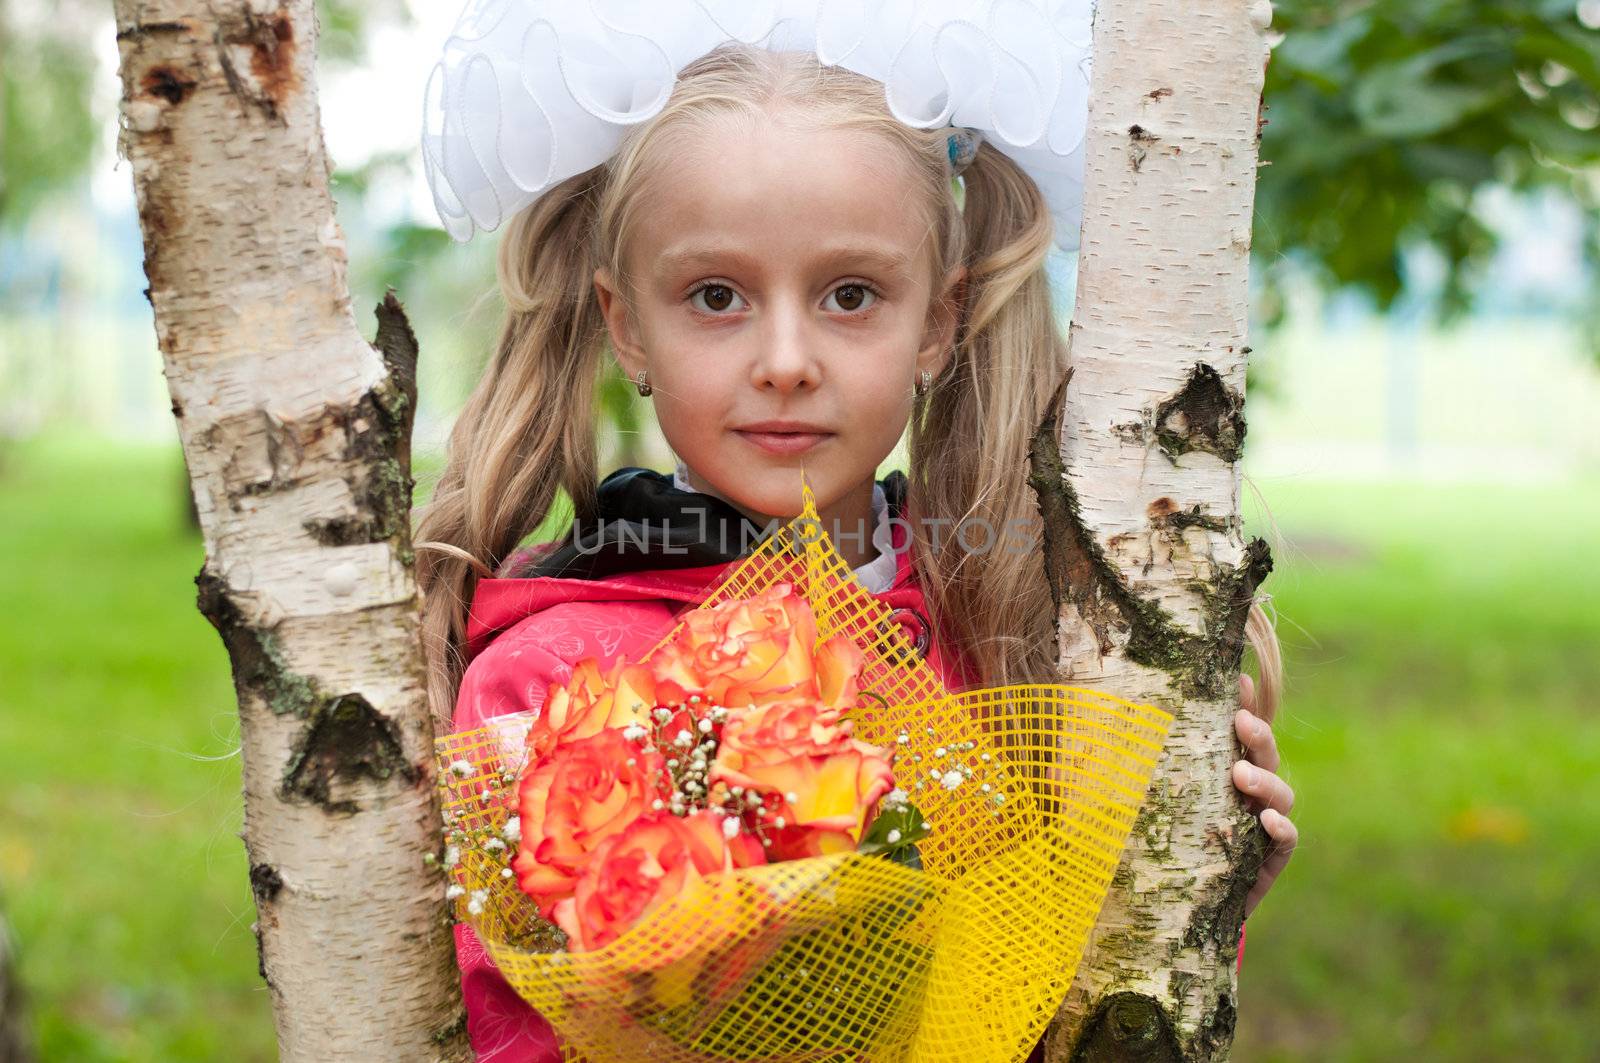 Schoolgirl dressed with a bouquet